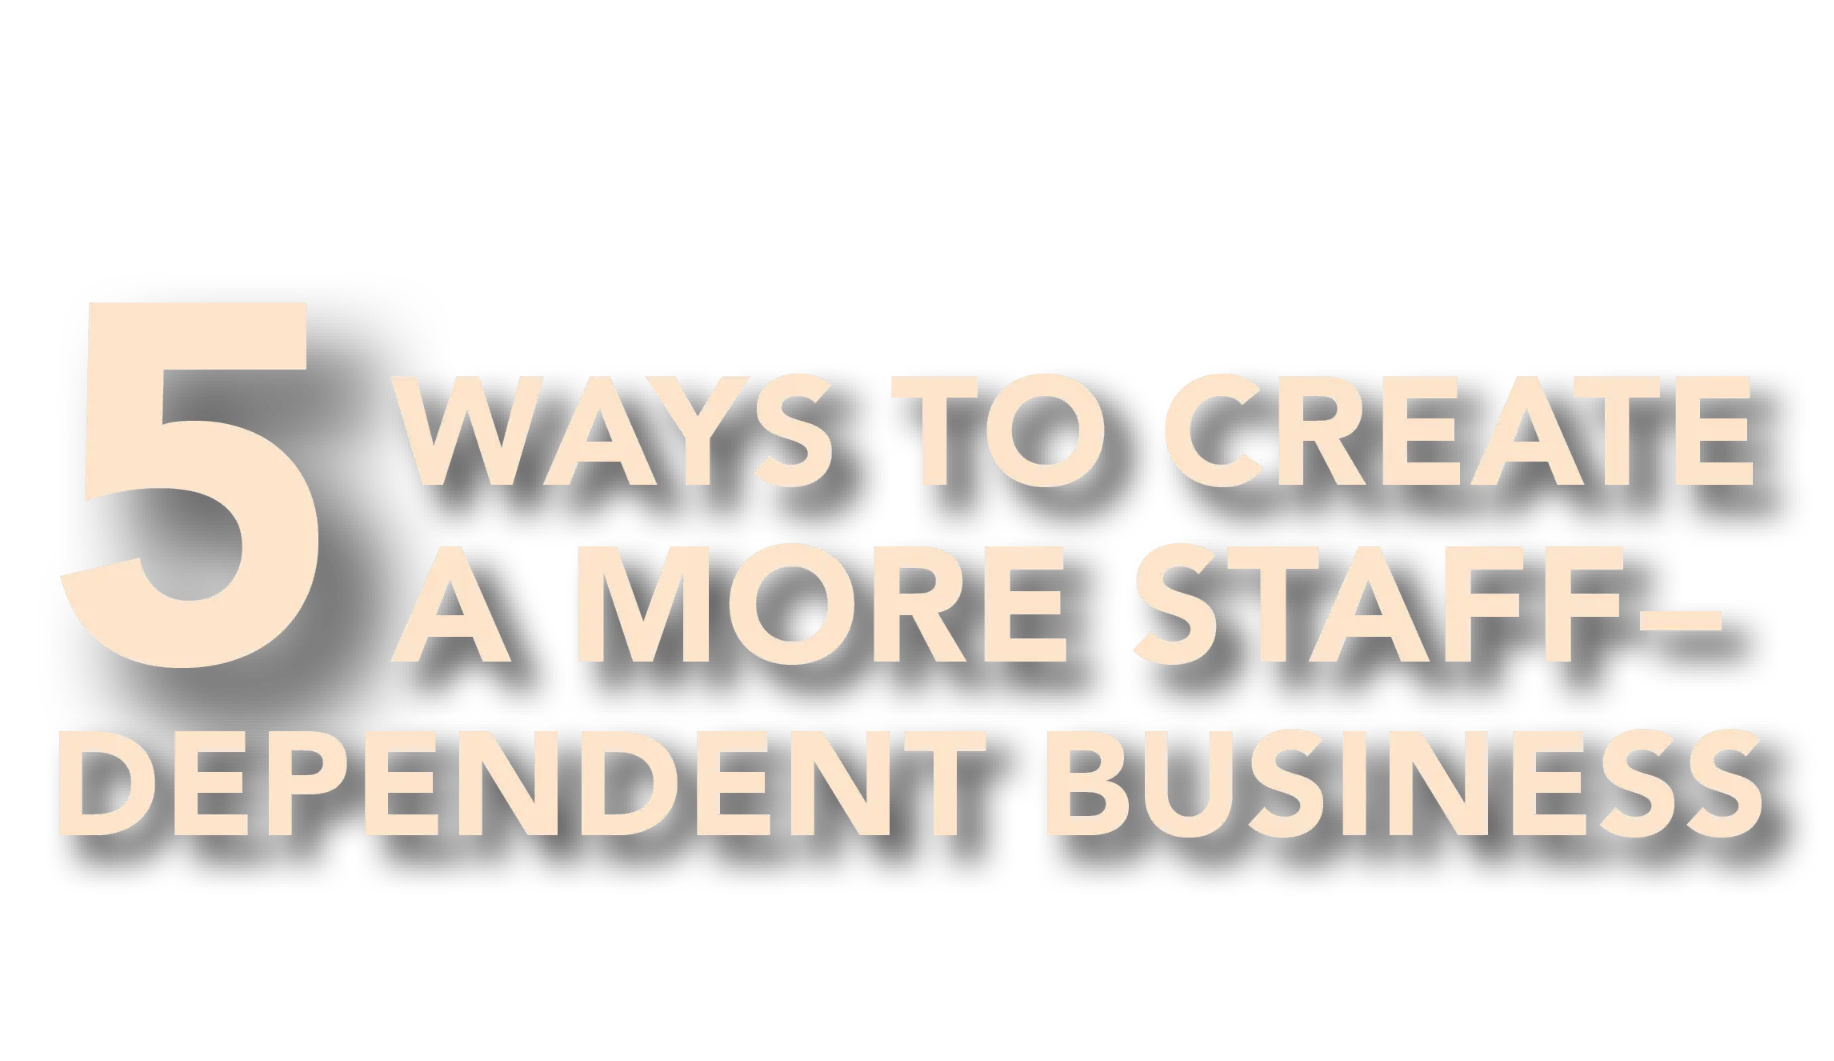 5 ways to create a more staff-dependent business